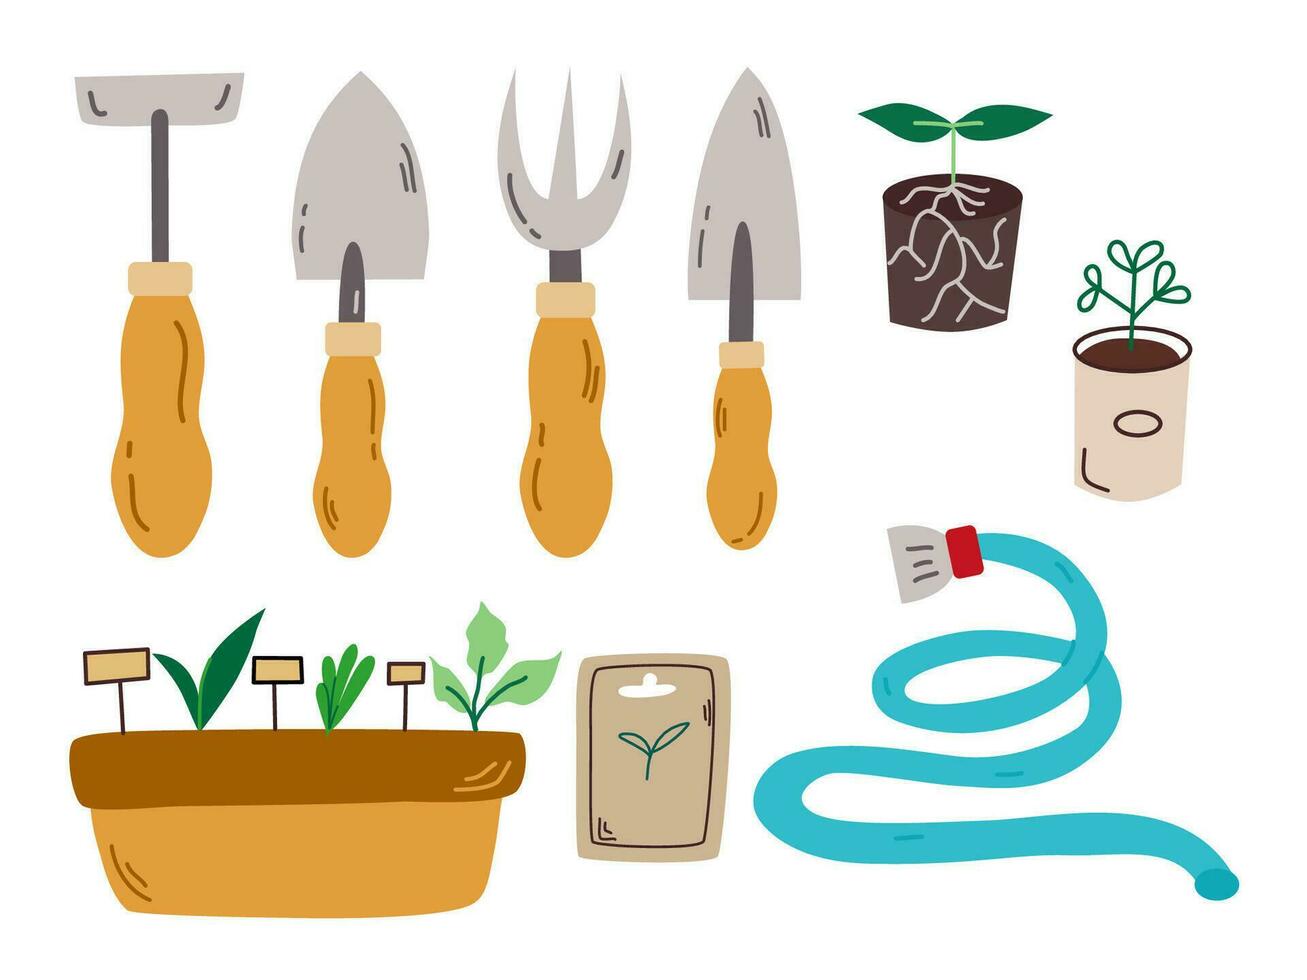 Collection of garden tools and plants. Gardening or horticulture concept. Vector clip art illustration isolated on white background